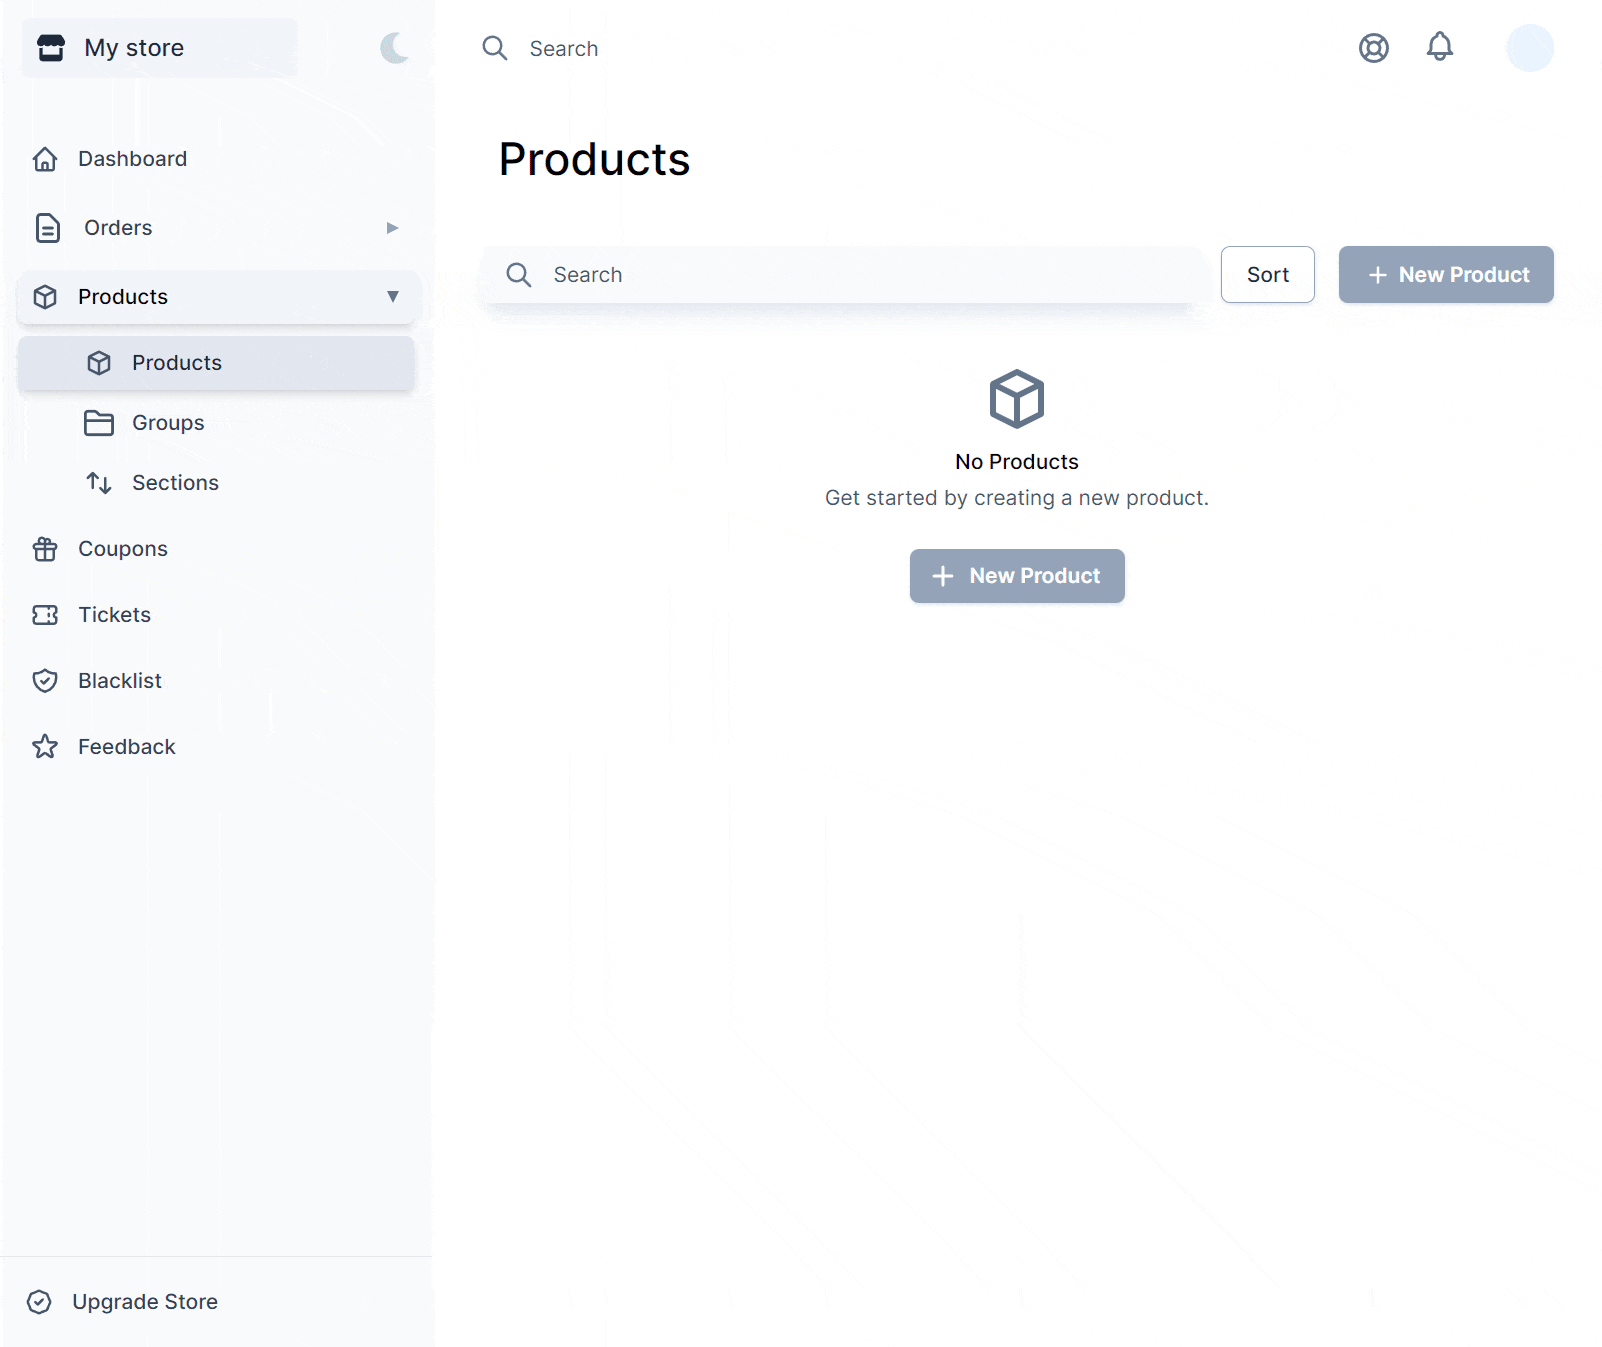 The product creation flow